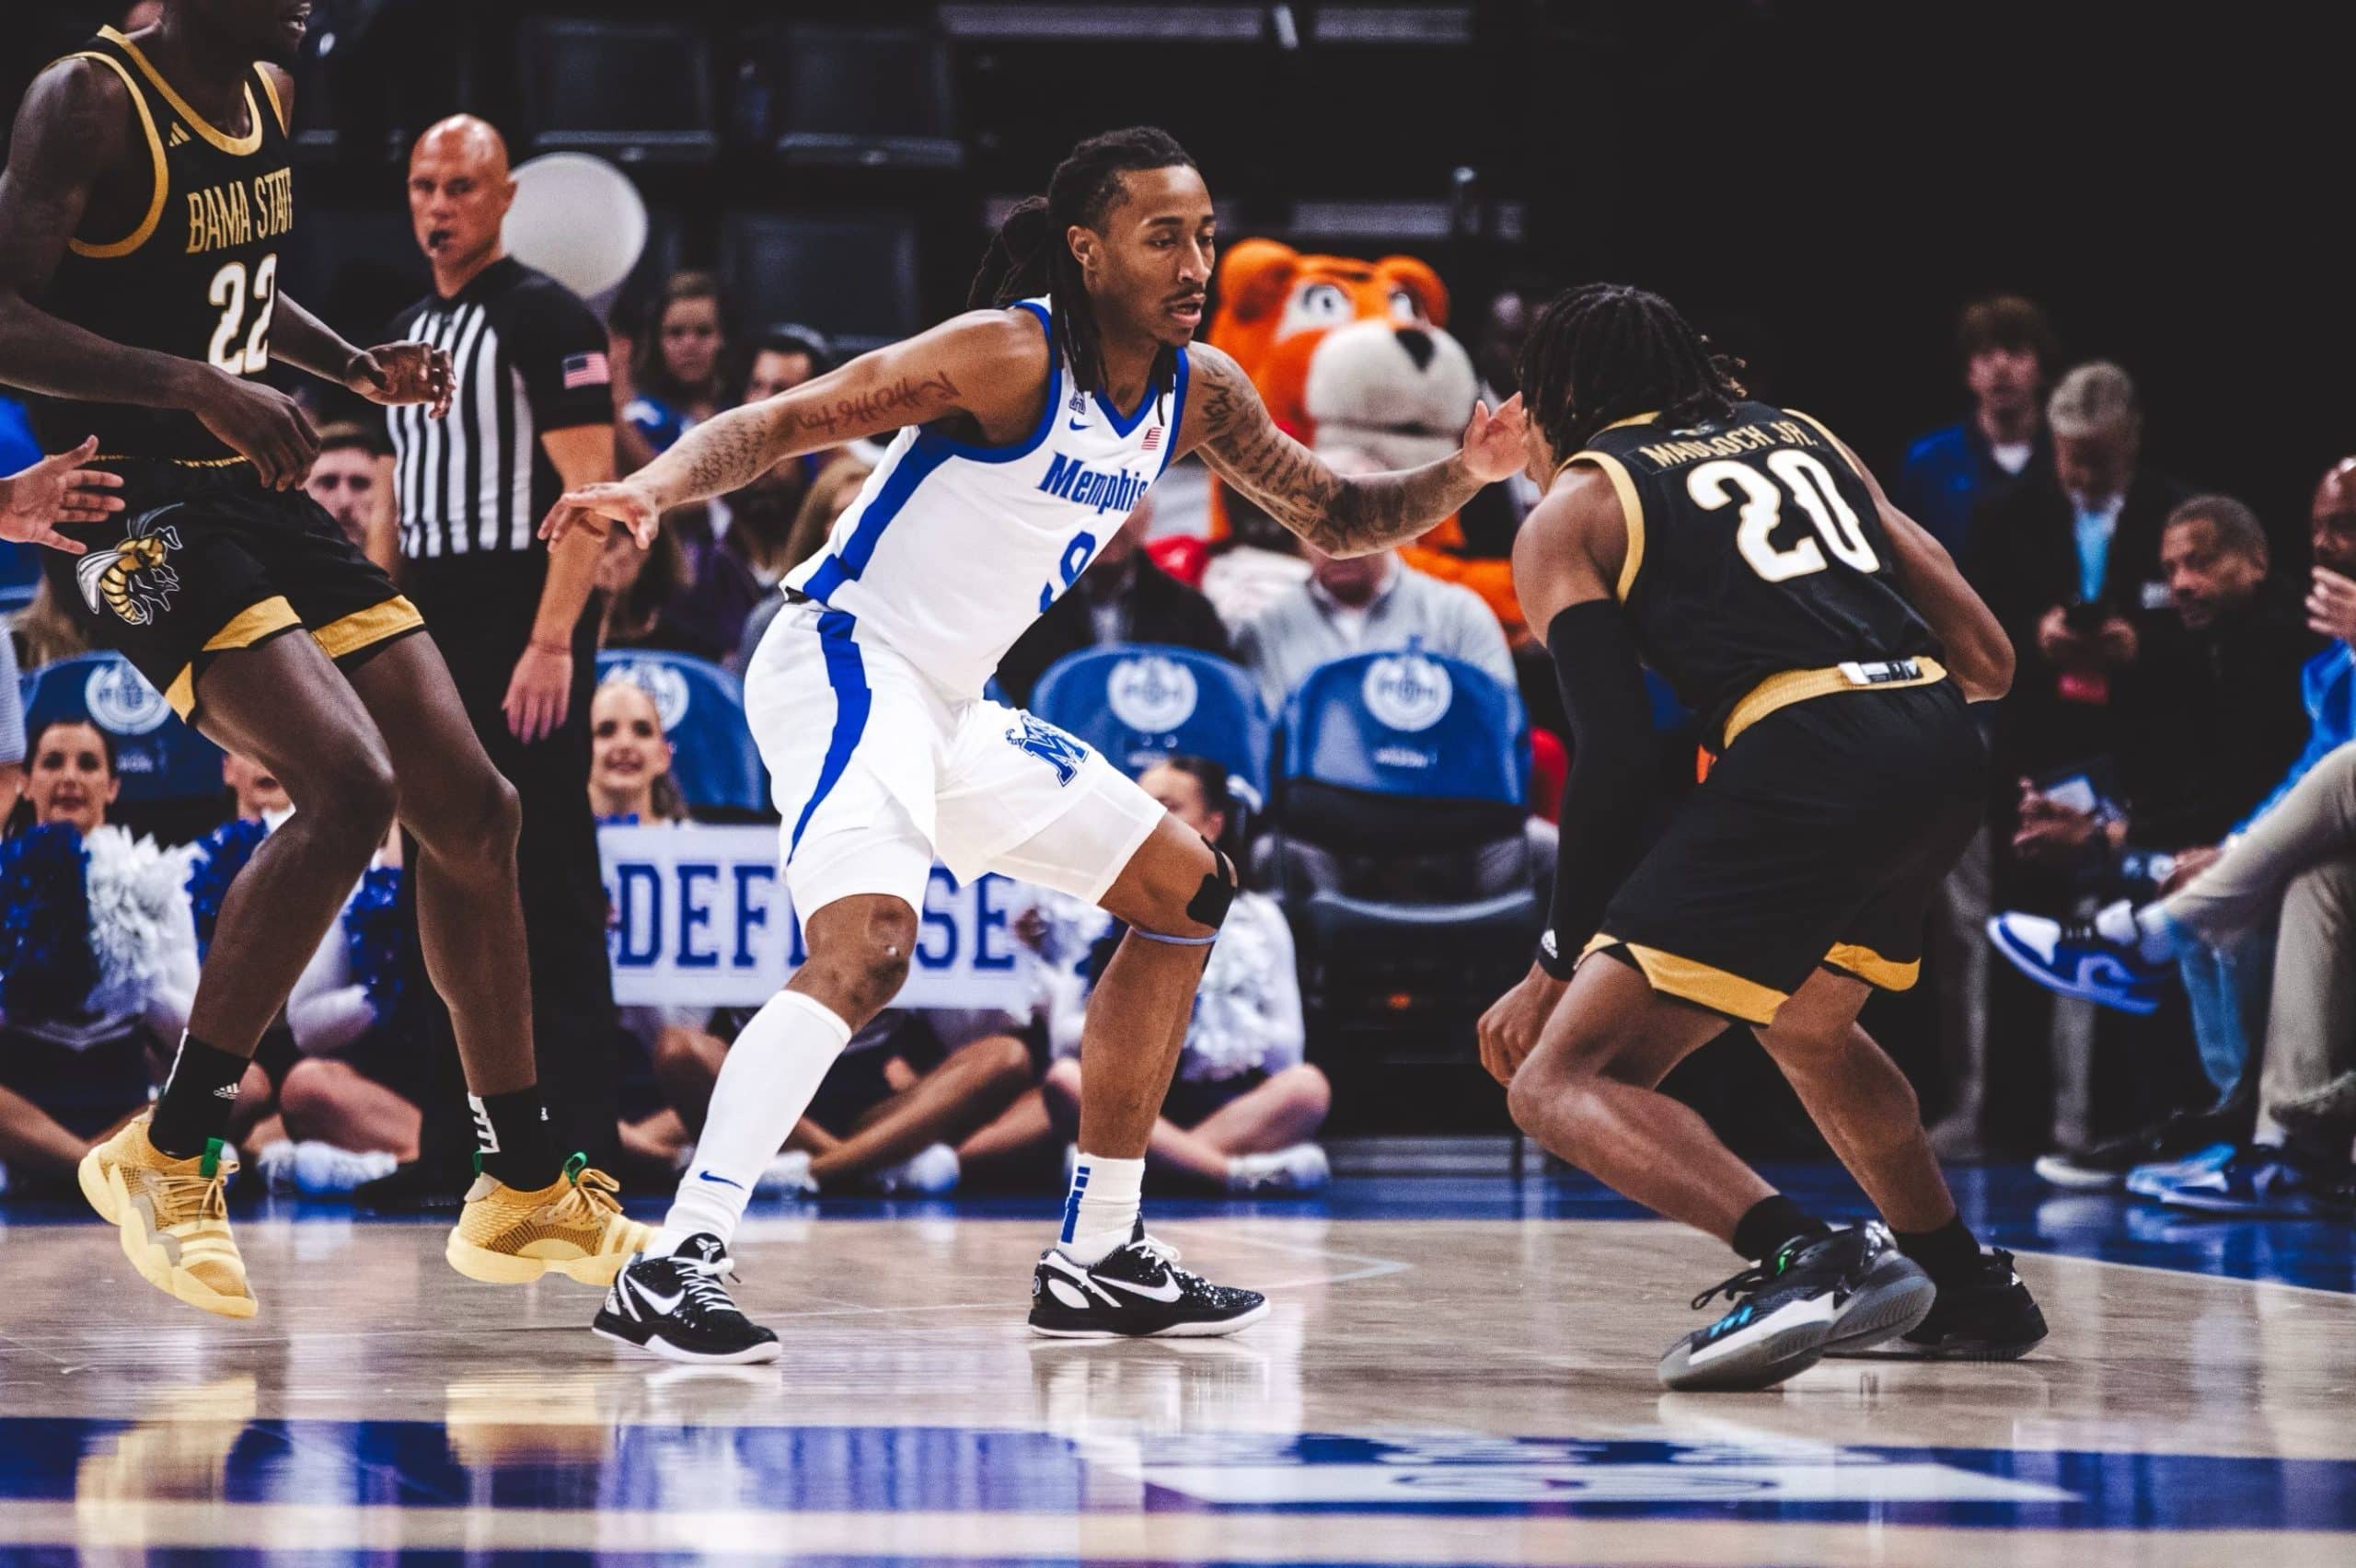 Featured image for “RECAP: Memphis survives a feisty effort from Alabama State to move to 3-0.”